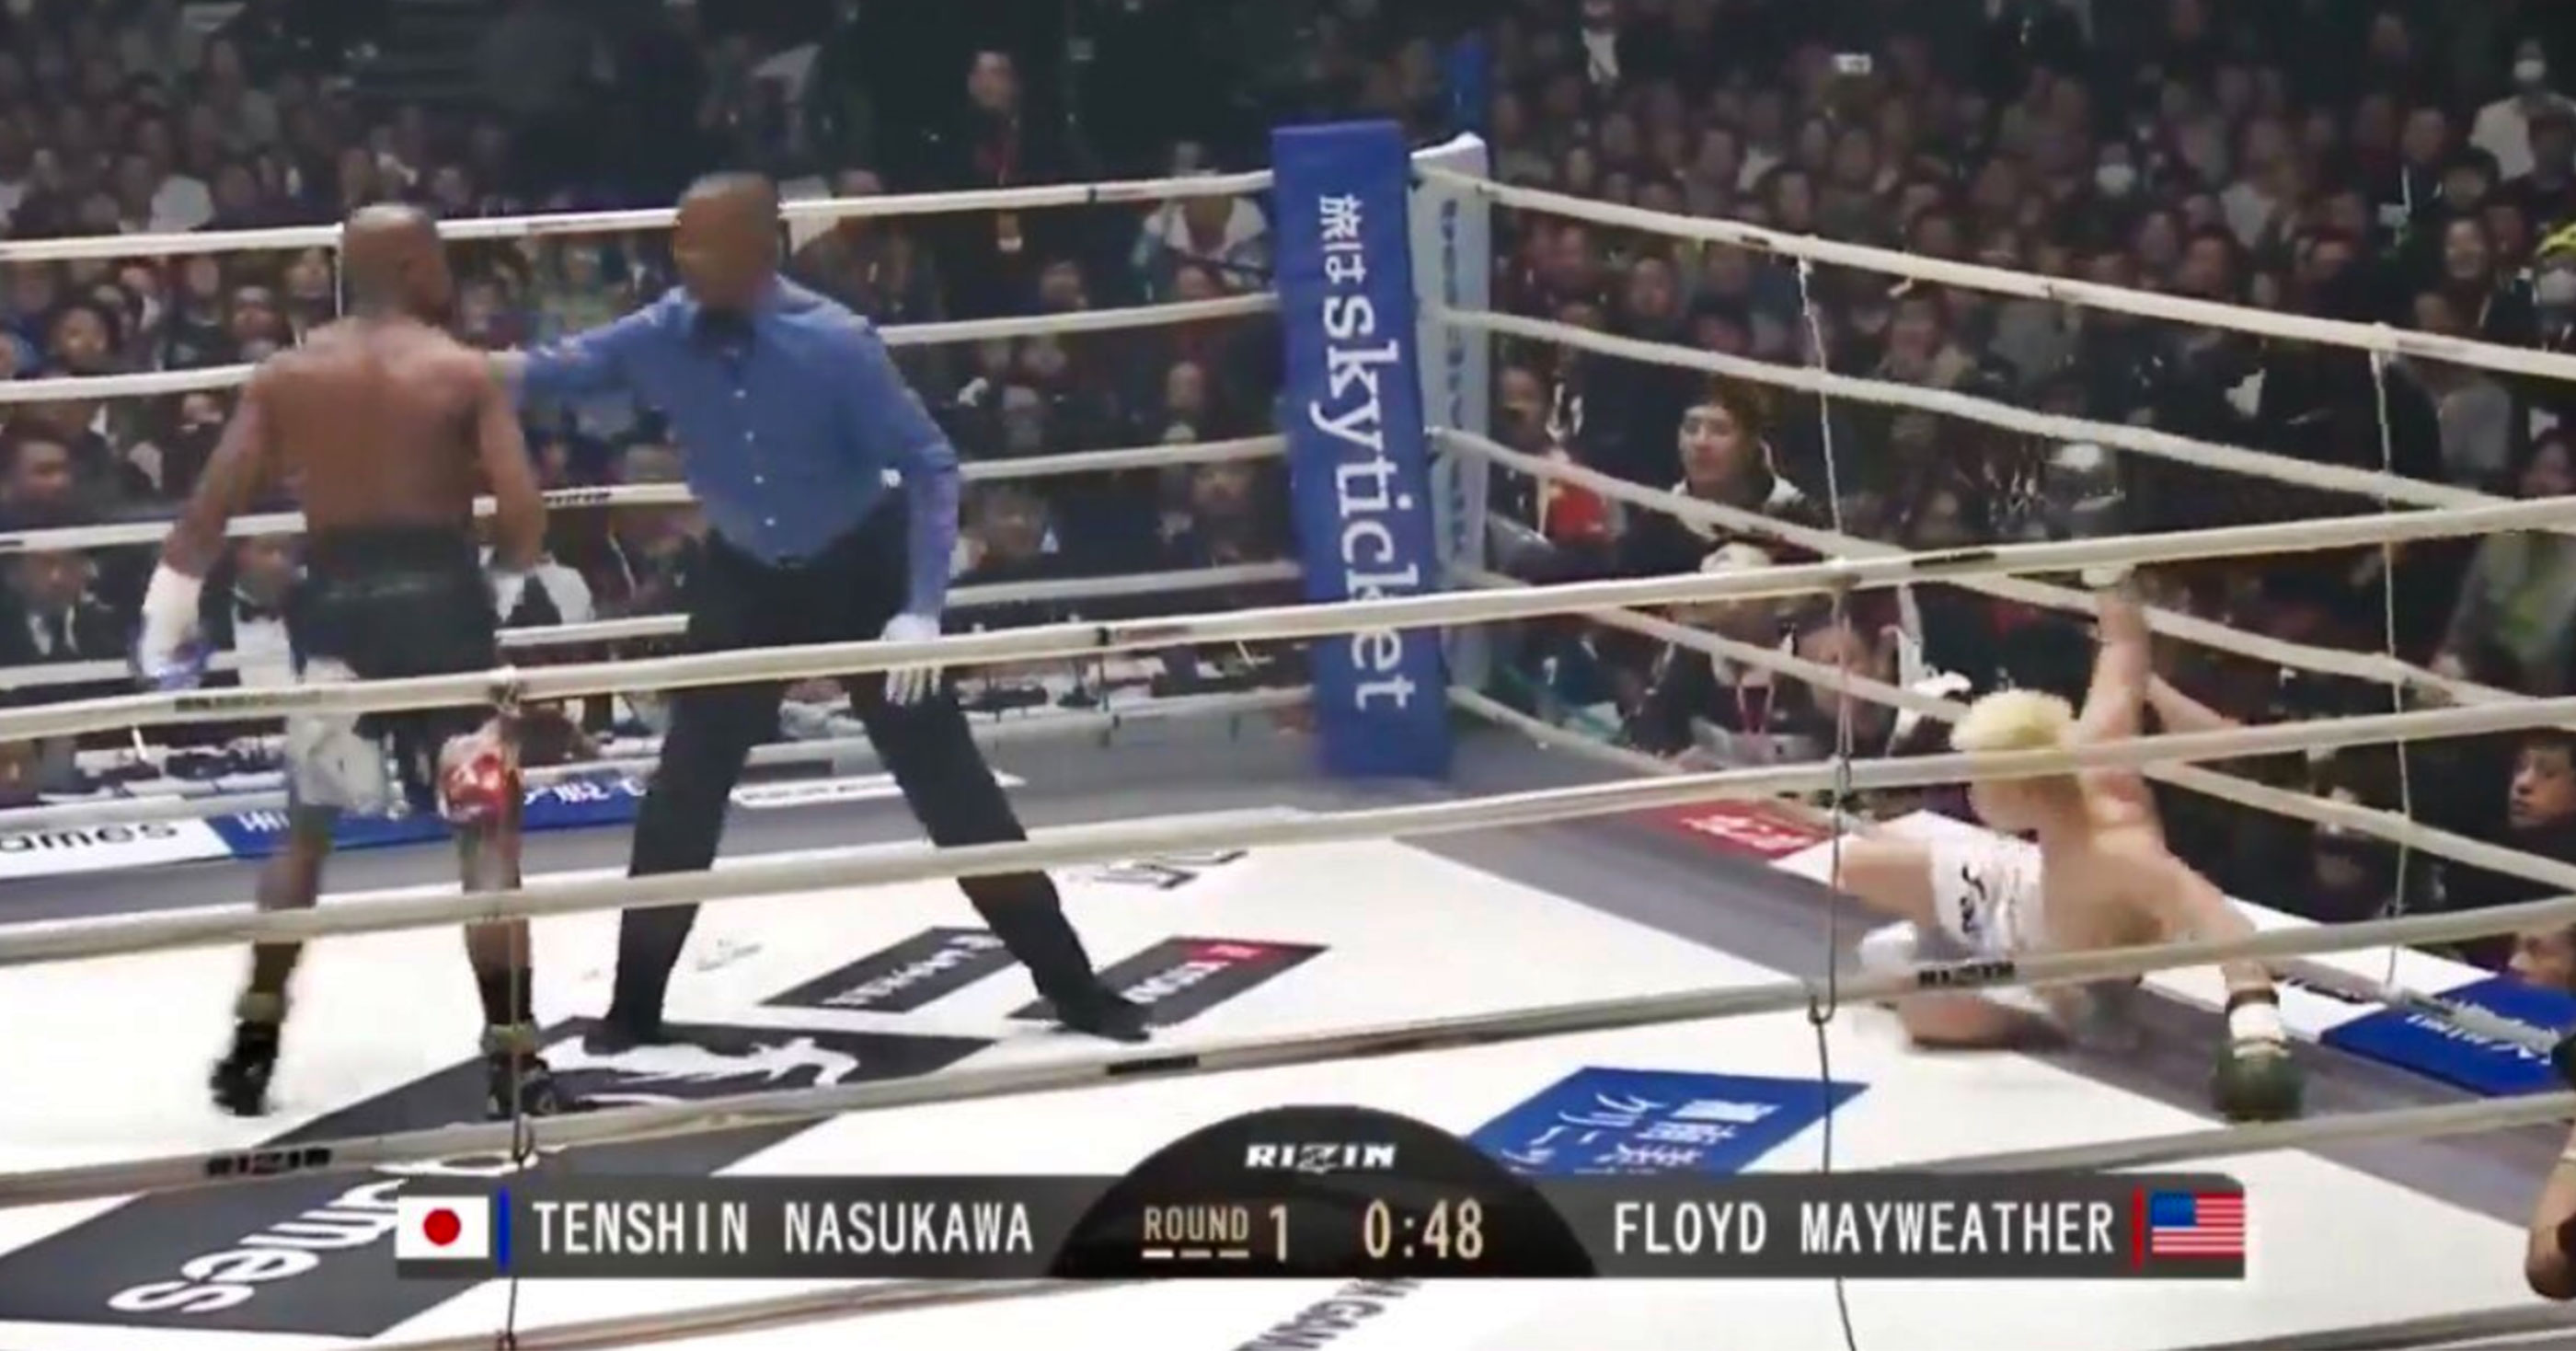 Floyd Mayweather Knocks Out Asian Boxer After Getting Paid $9M To Fight Him For One Round